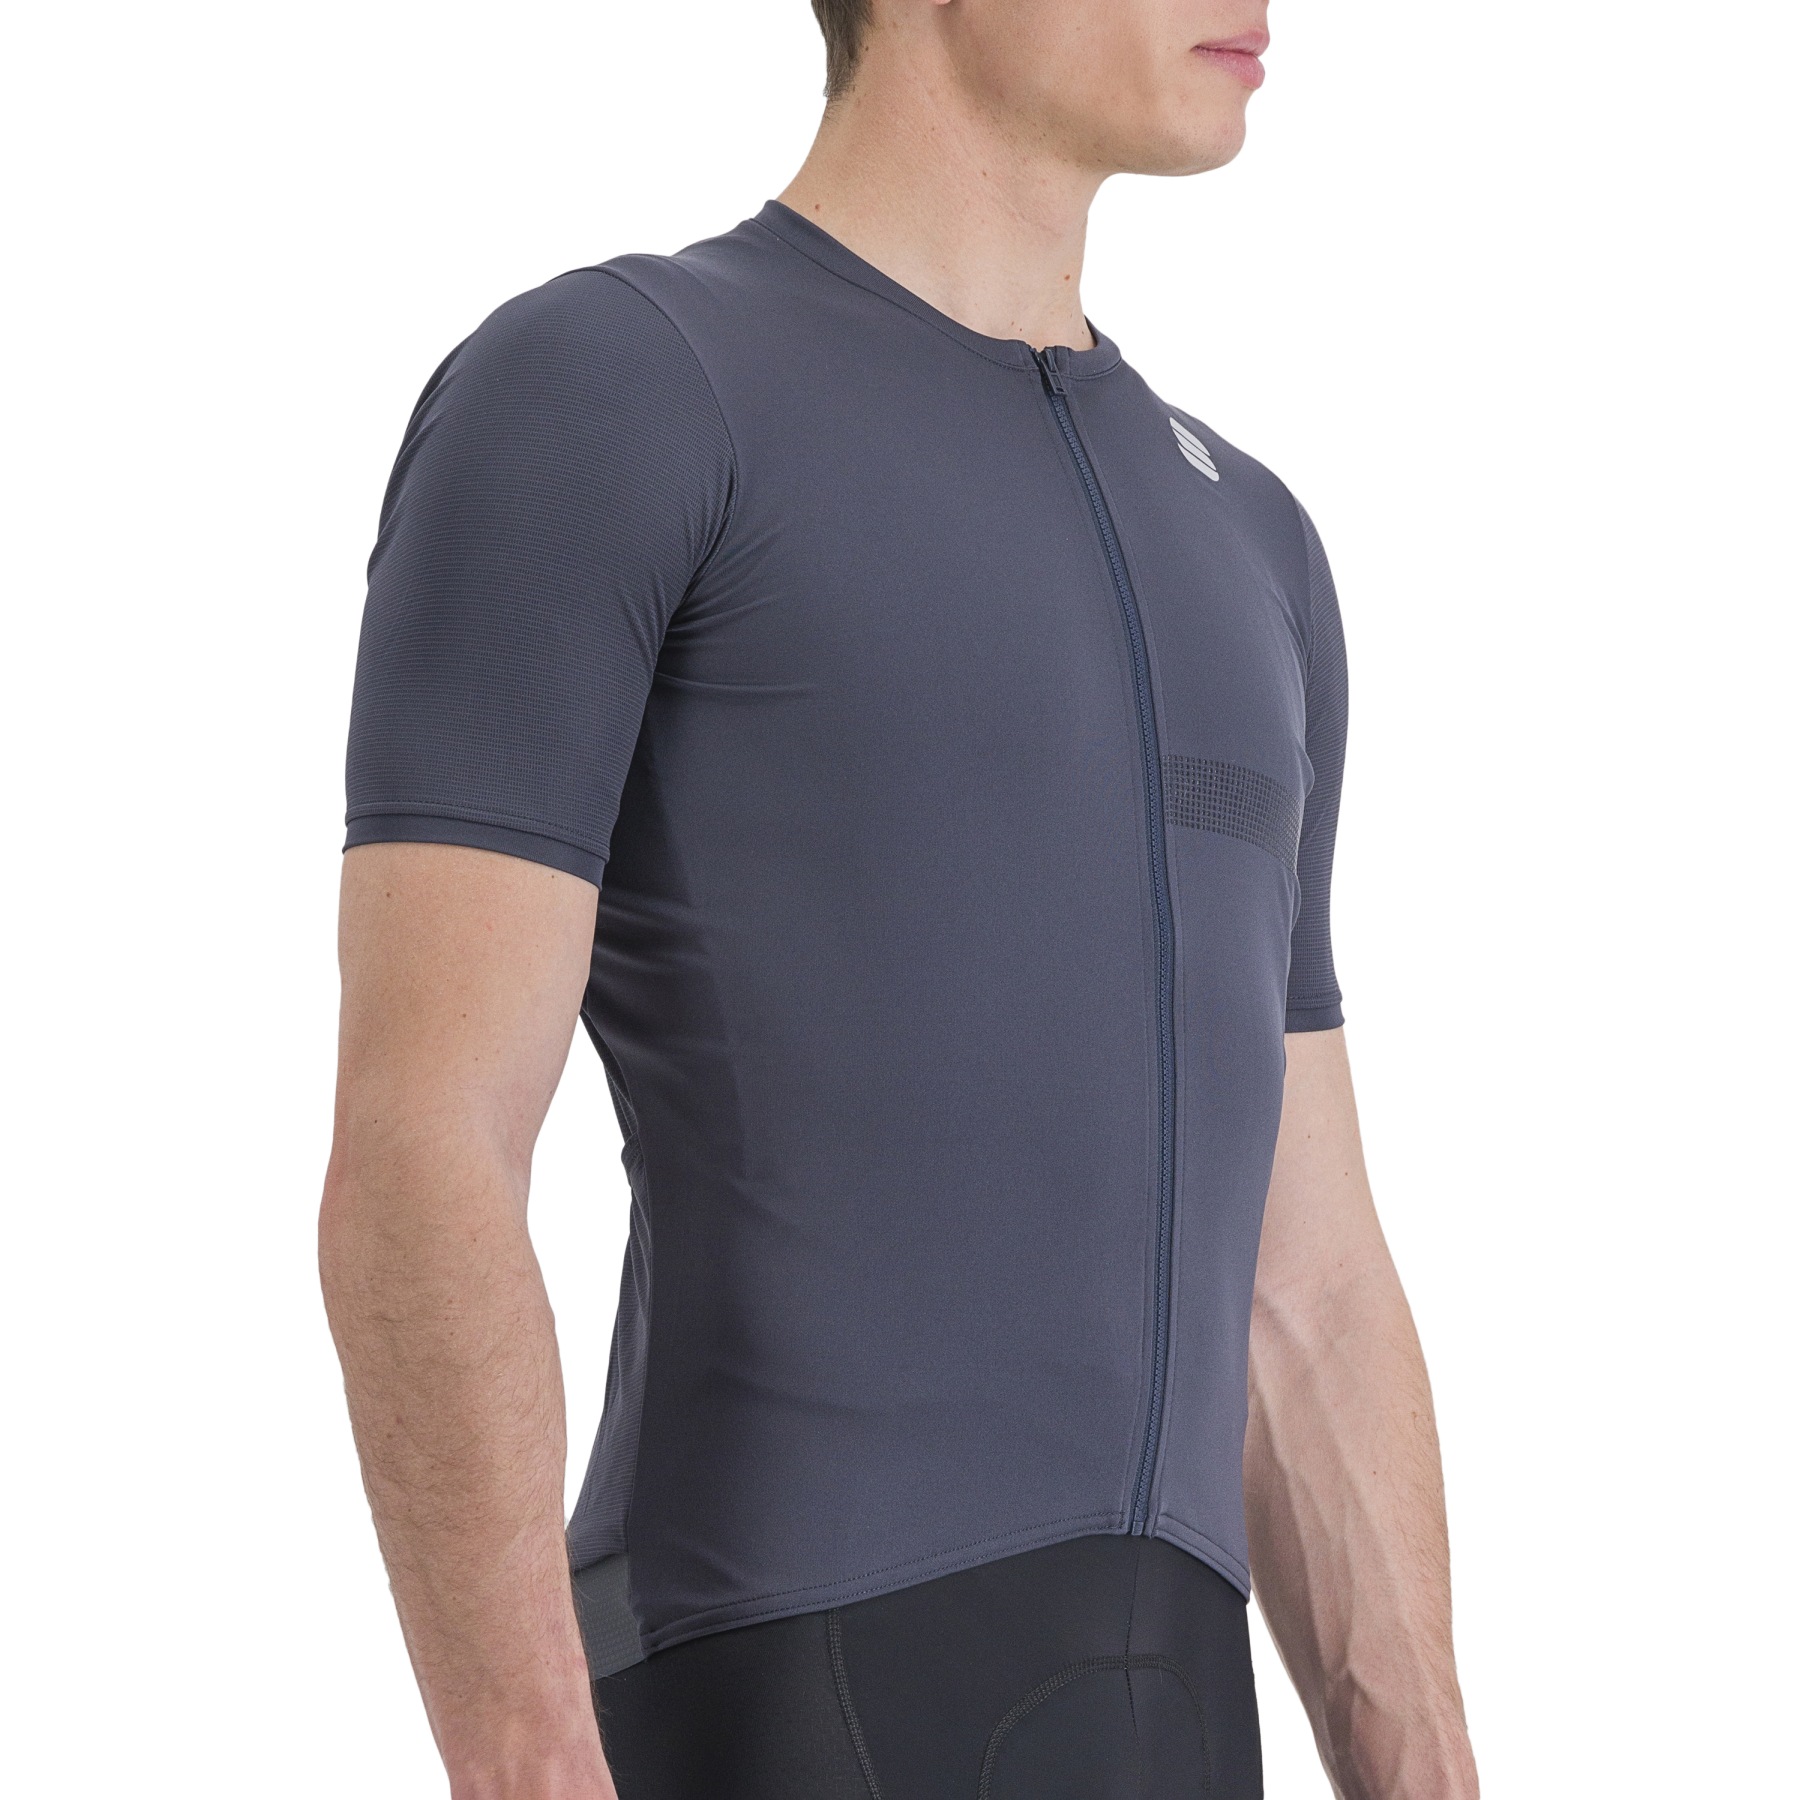 Picture of Sportful Matchy Short Sleeve Bike Jersey - 456 Galaxy Blue